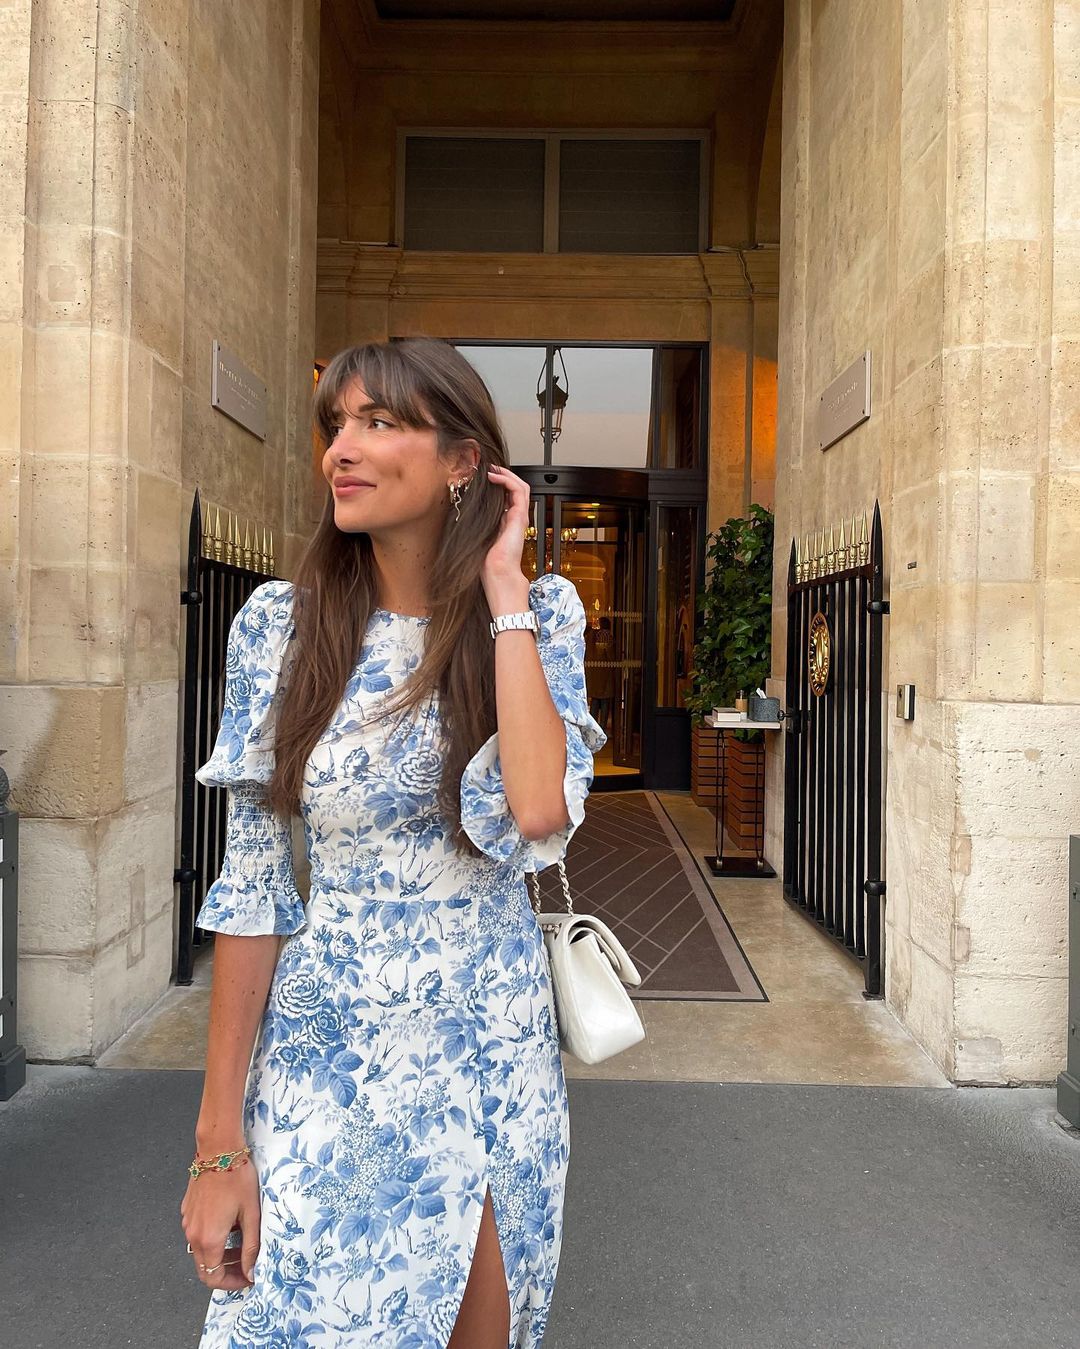 French Girl Wedding Guest Outfits: Julie Sergent Ferreri wears a blue and white printed dress